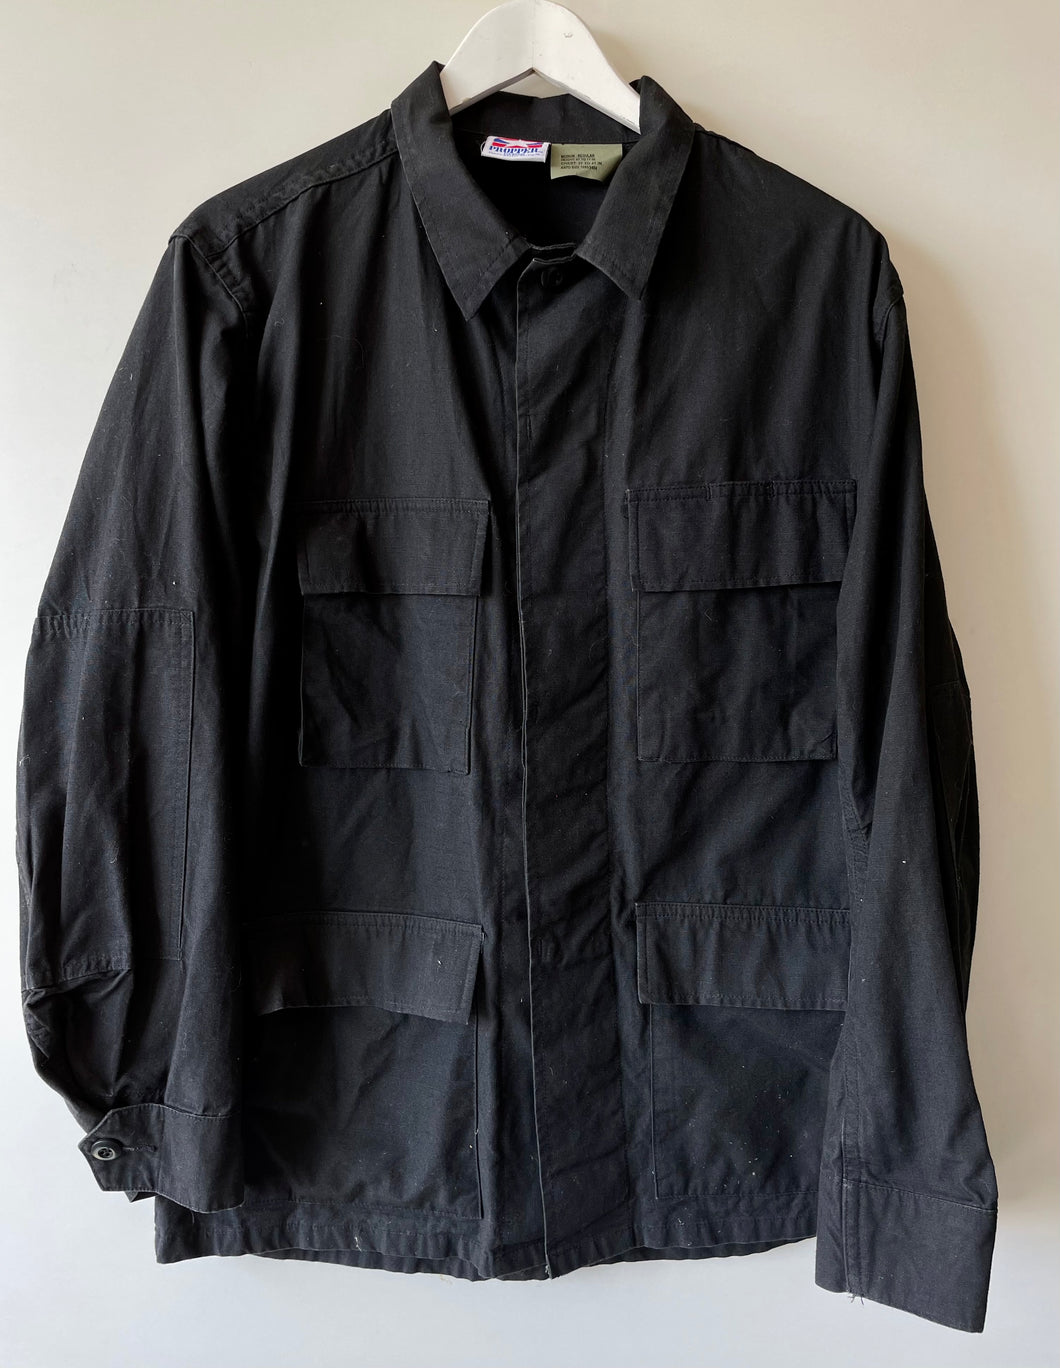 Black American military jacket chore style by Propper Medium M